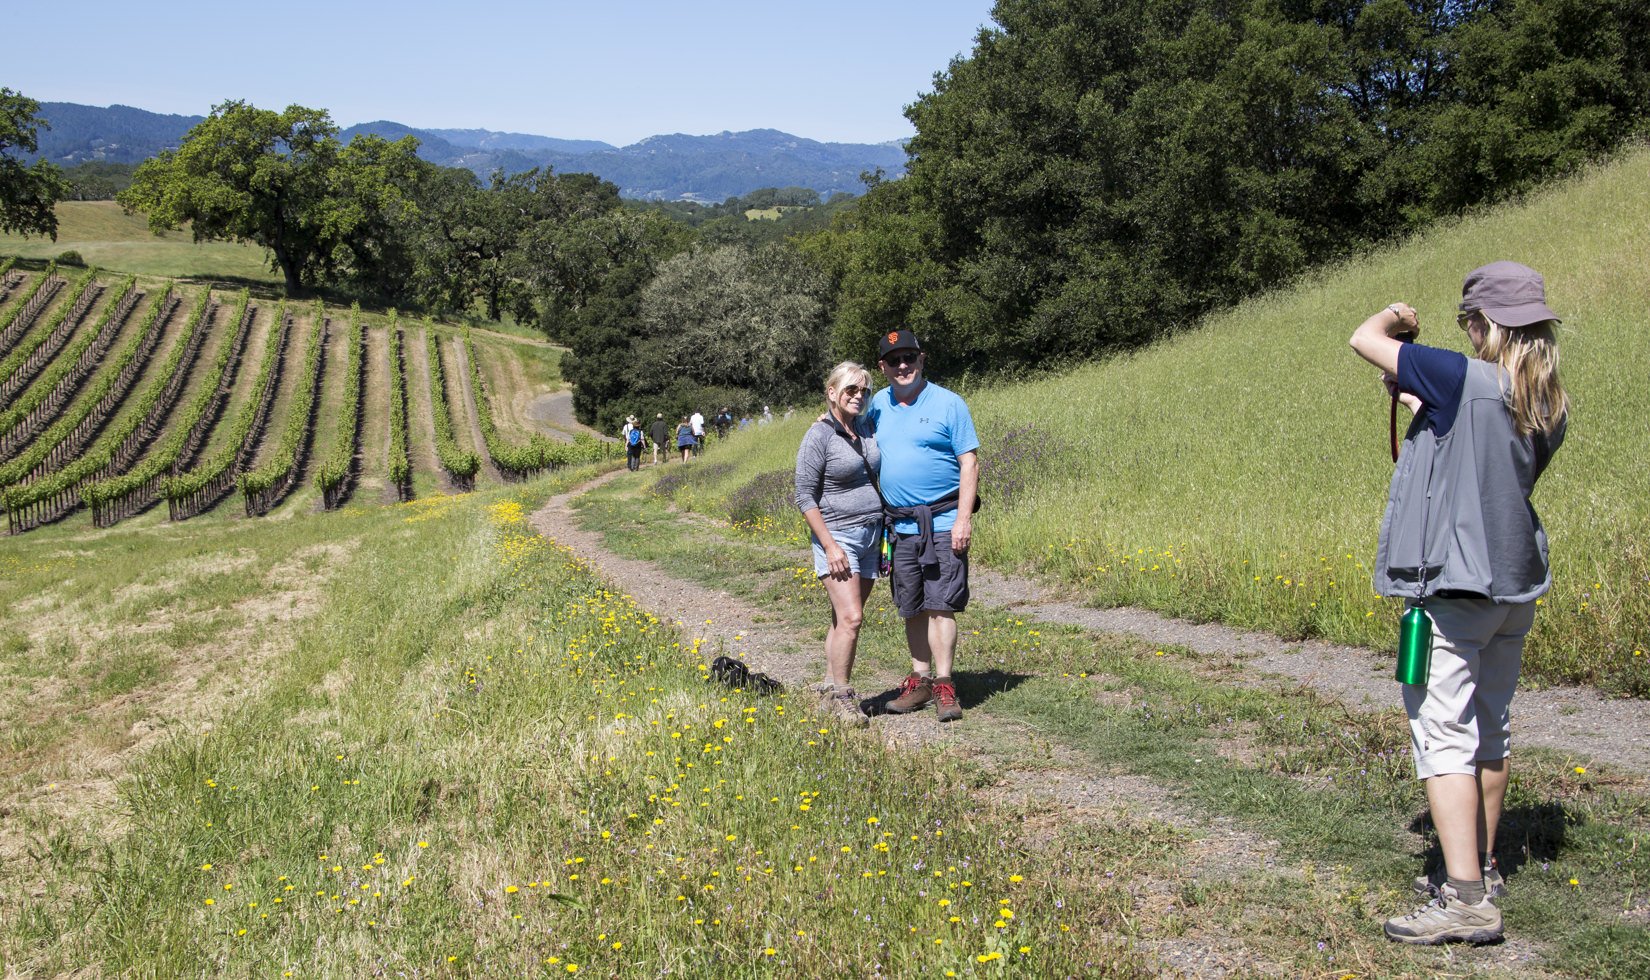 Guests posing for a photo during a Spring Vineyard Hike at Jordan Winery.